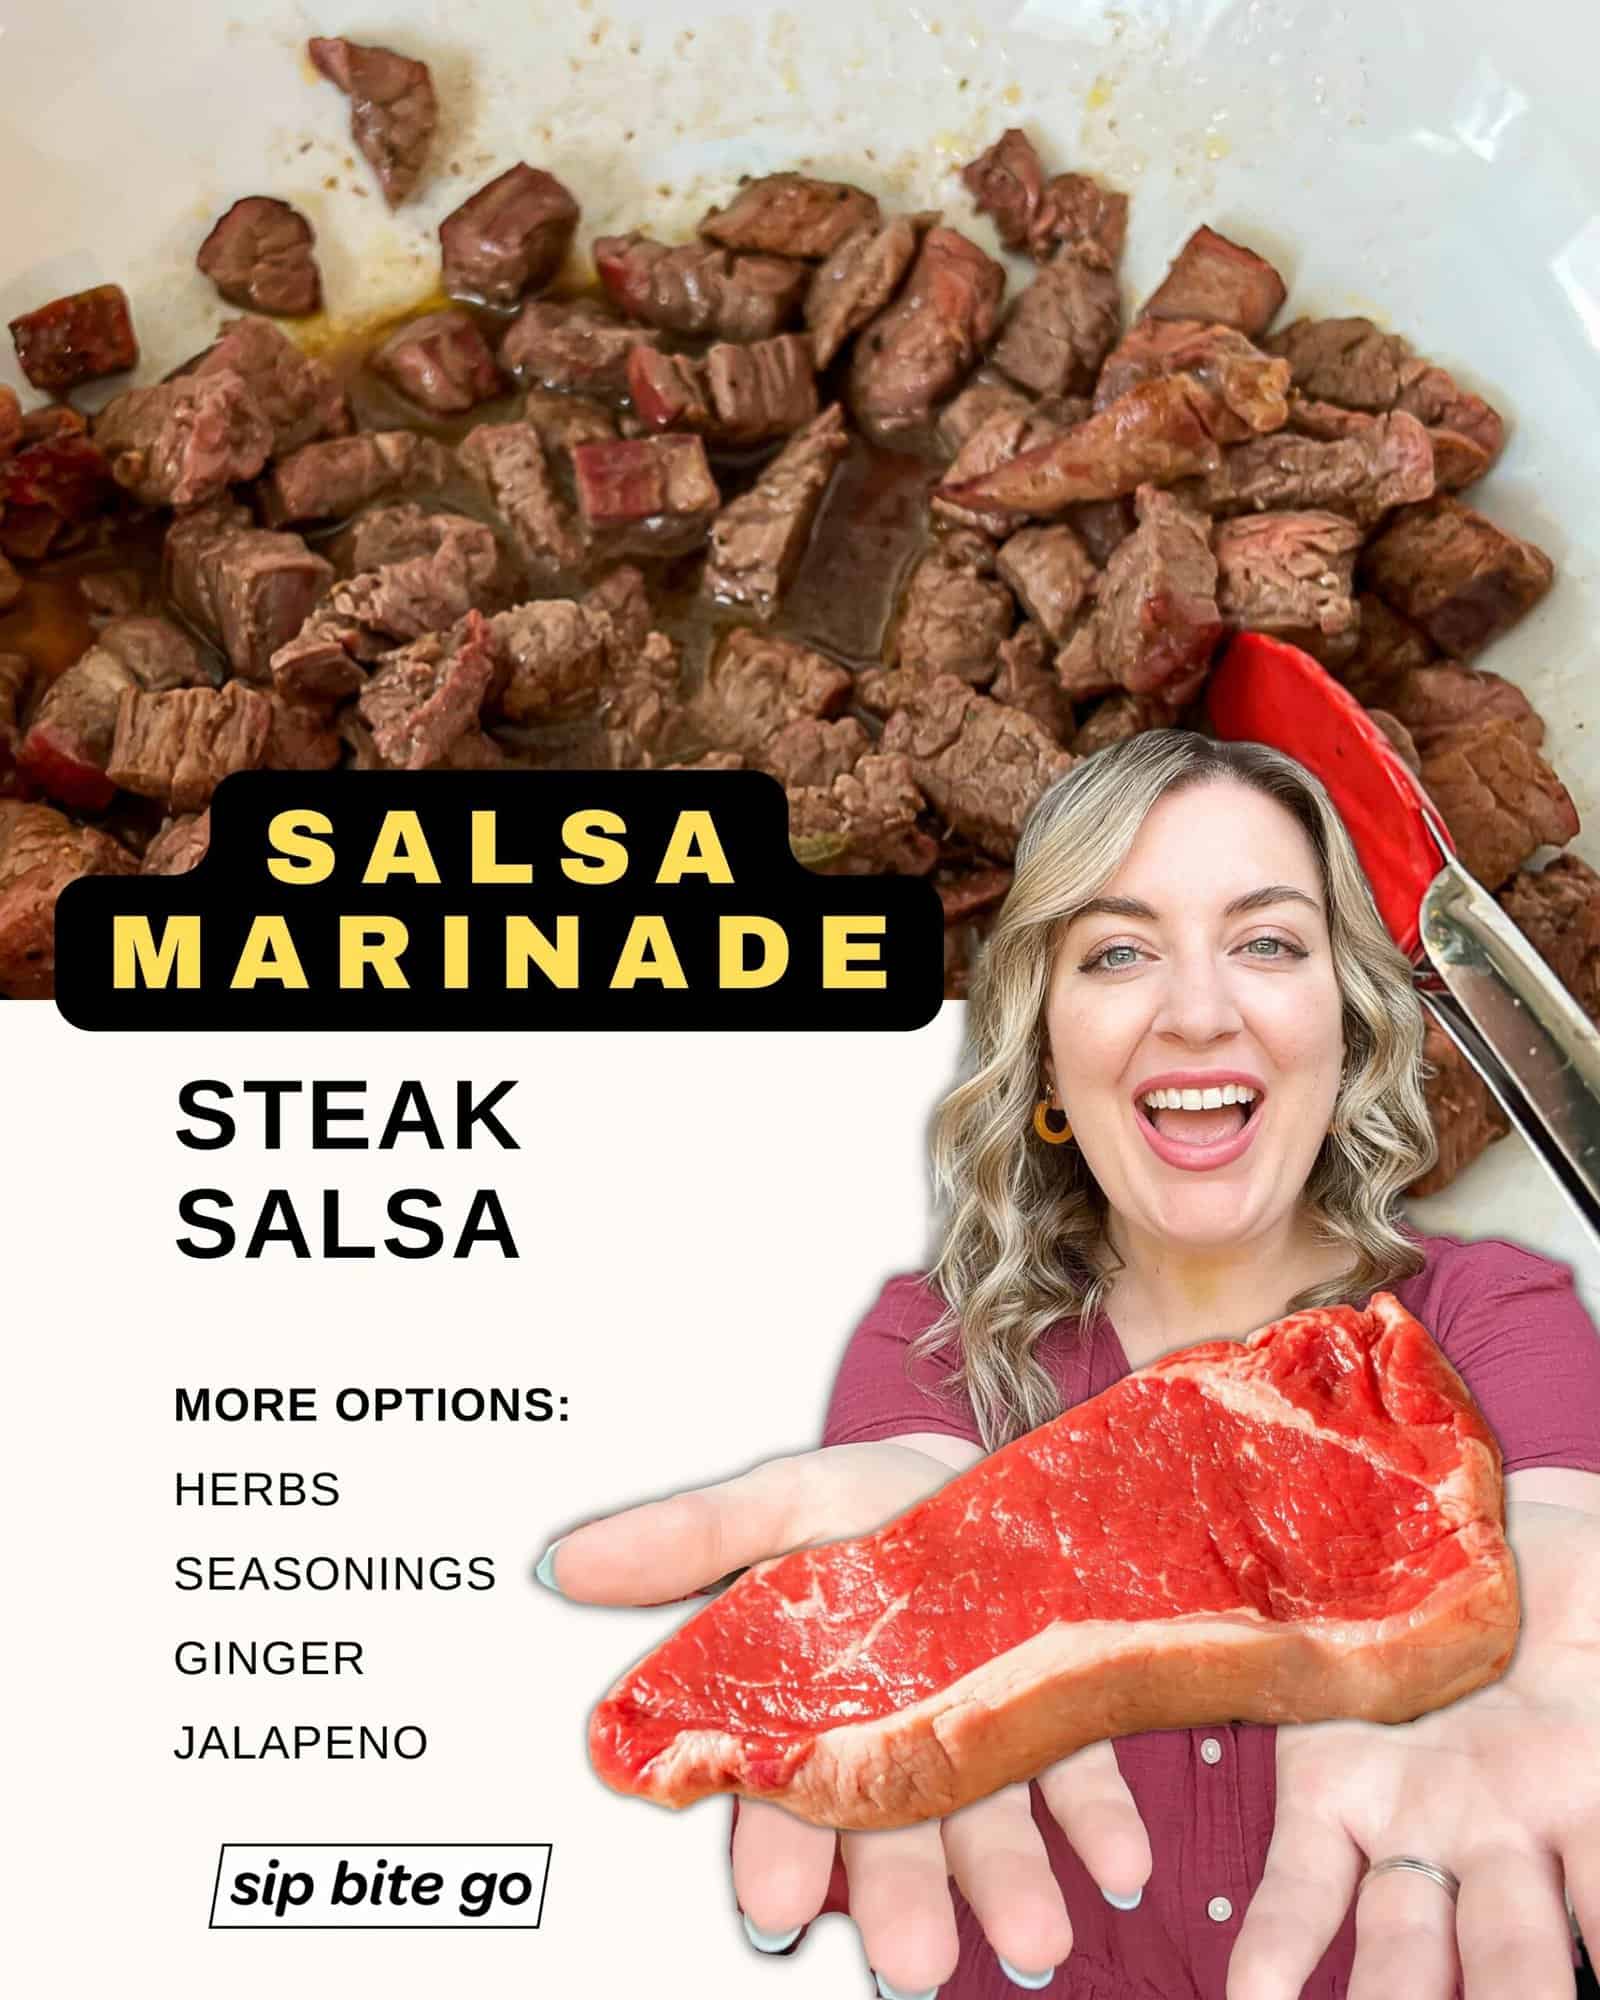 Infographic with recipe ingredients and list of what you need to marinate smoked or grilled steak in Salsa